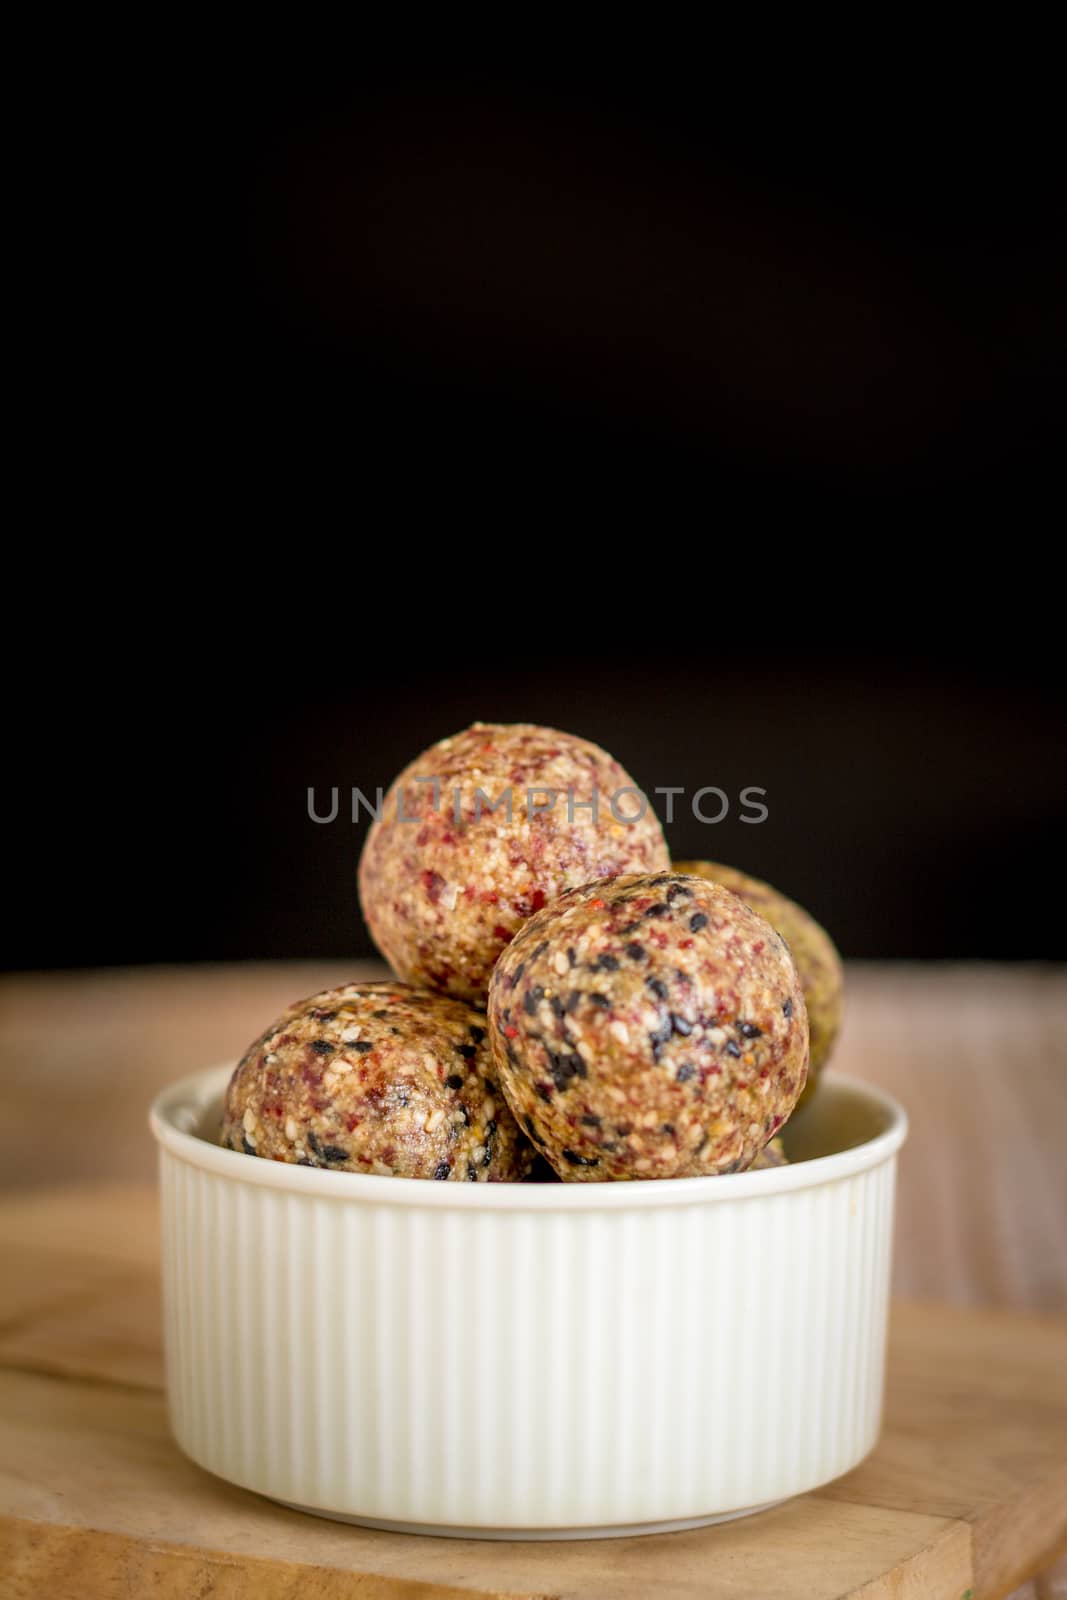 Healthy snack. Energy ball with date plam, black and white sesame, chia and rasin in ceramic bowl on wooden table. Vegan vegetarian.